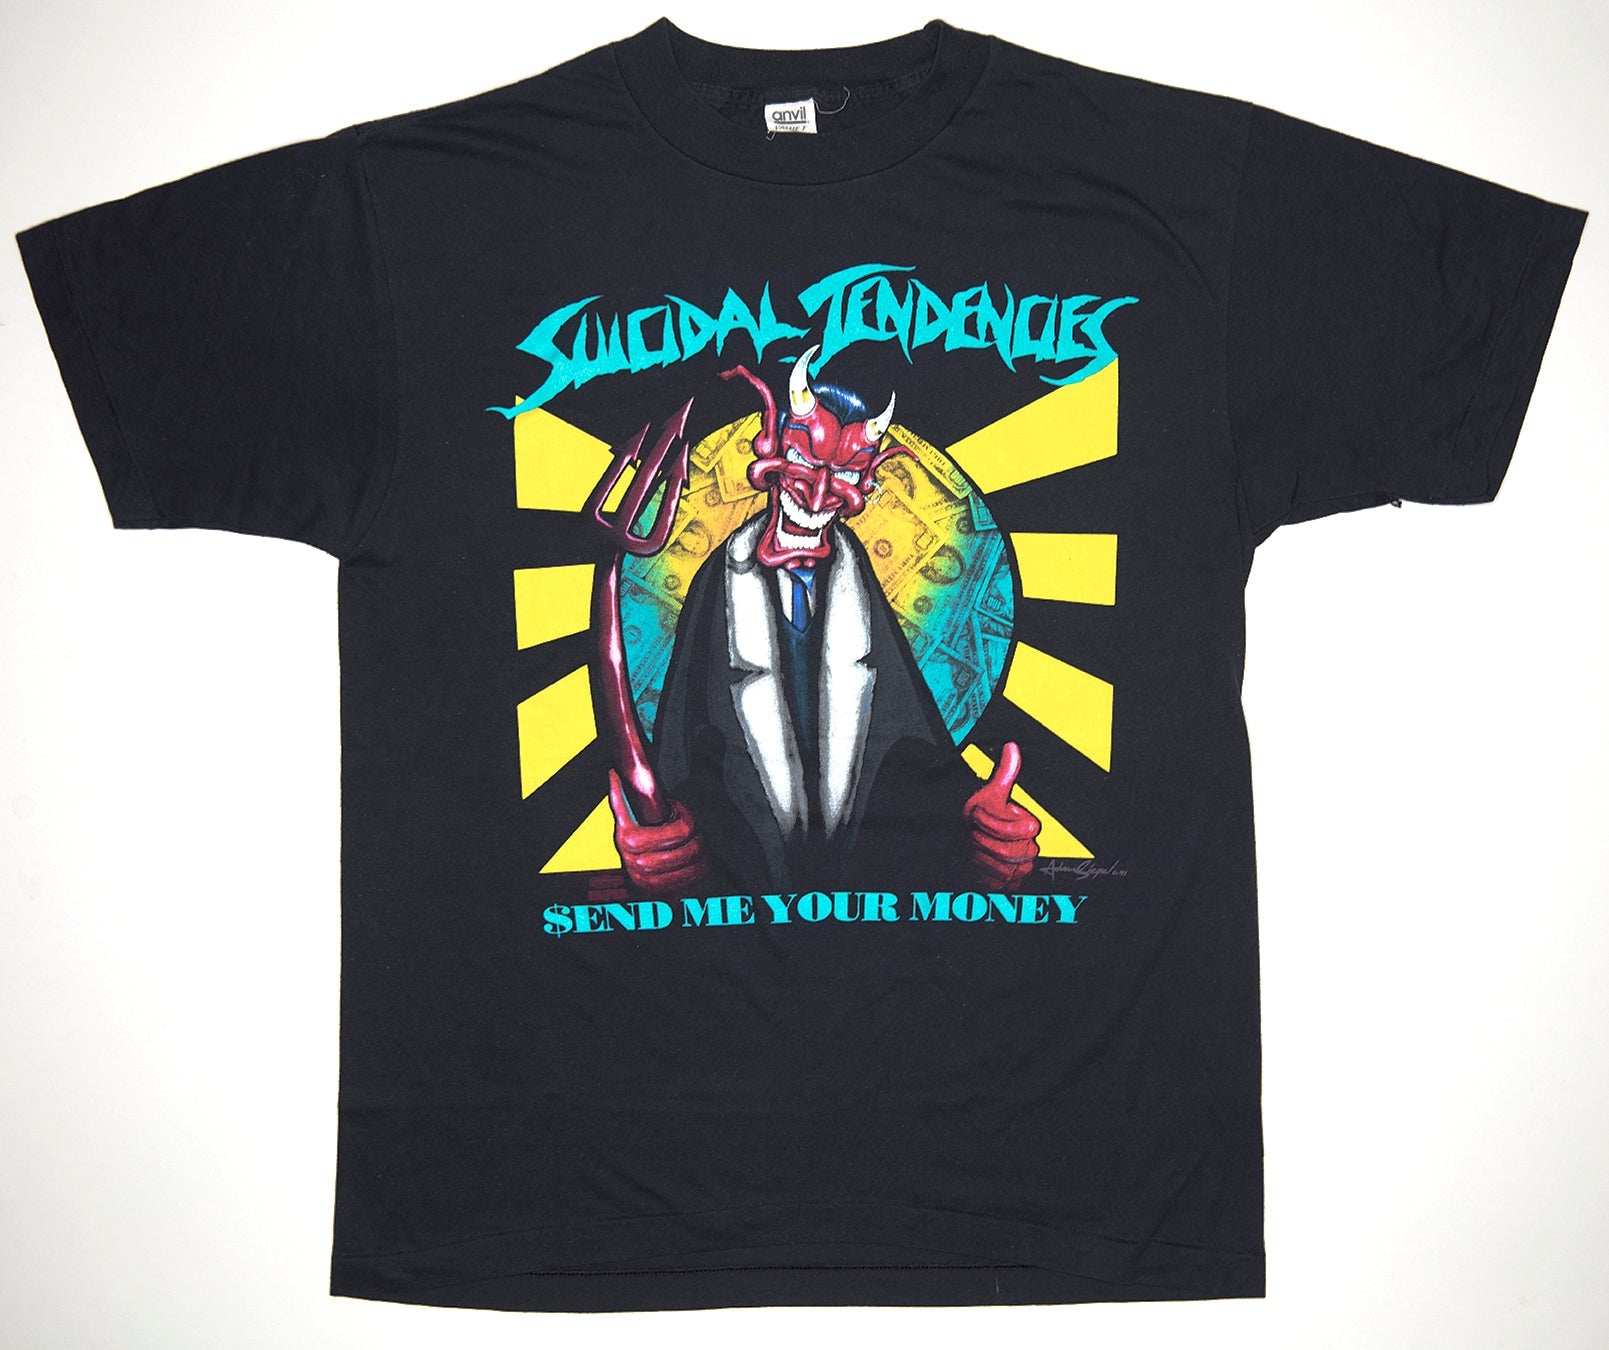 Suicidal Tendencies - You Can't Bring Me Down Touring 1990 Shirt Size Large